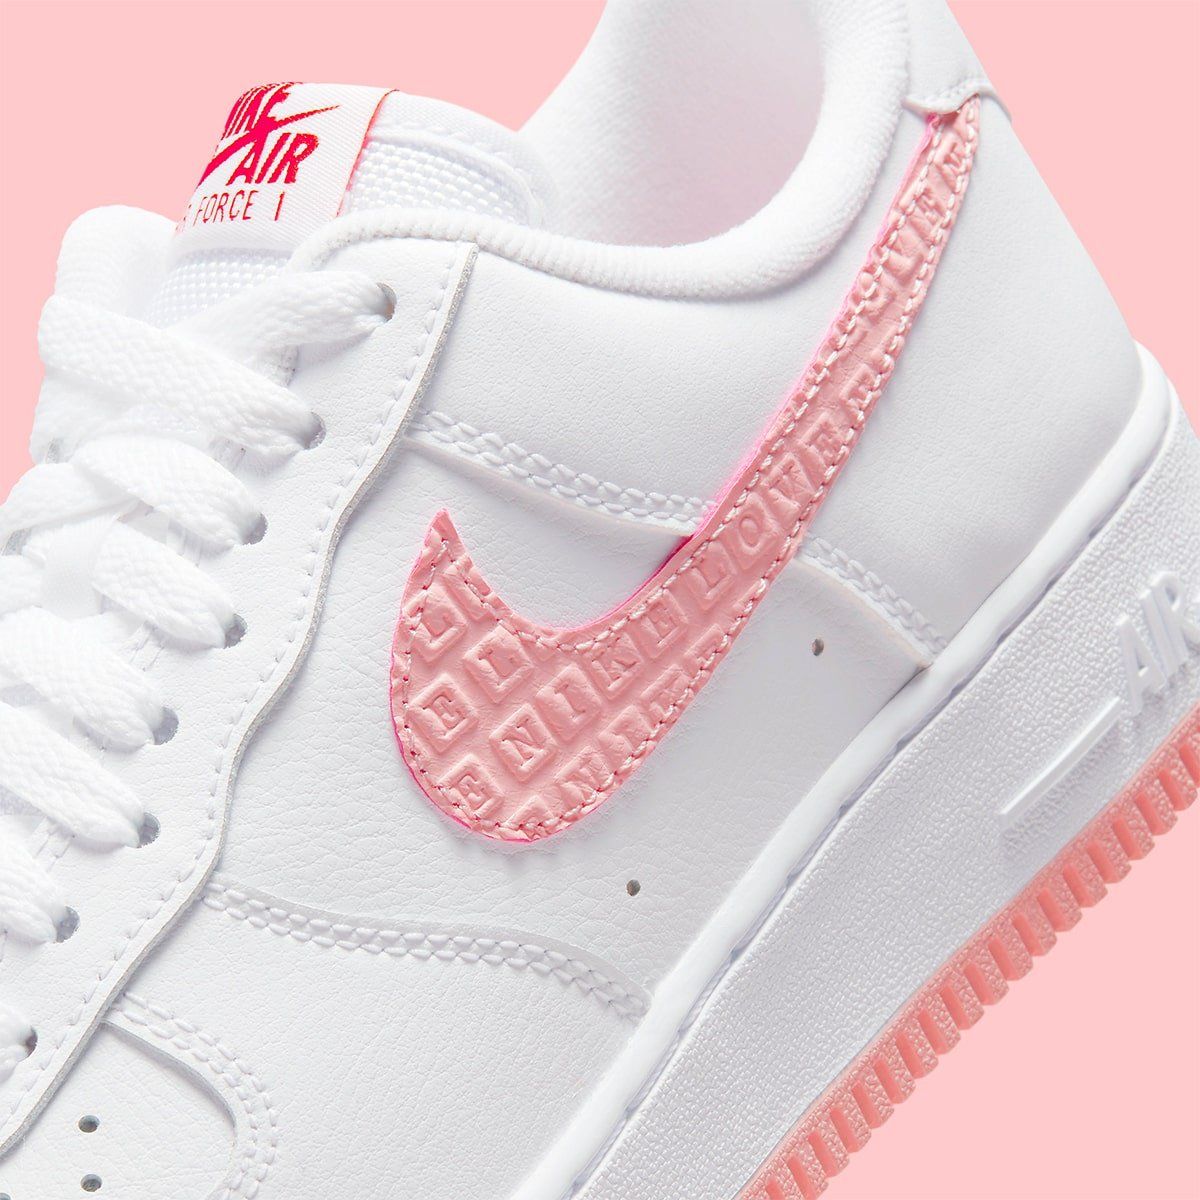 equation coach Patronize New Looks // Nike Air Force 1 "Valentine's Day" 2022 | HOUSE OF HEAT